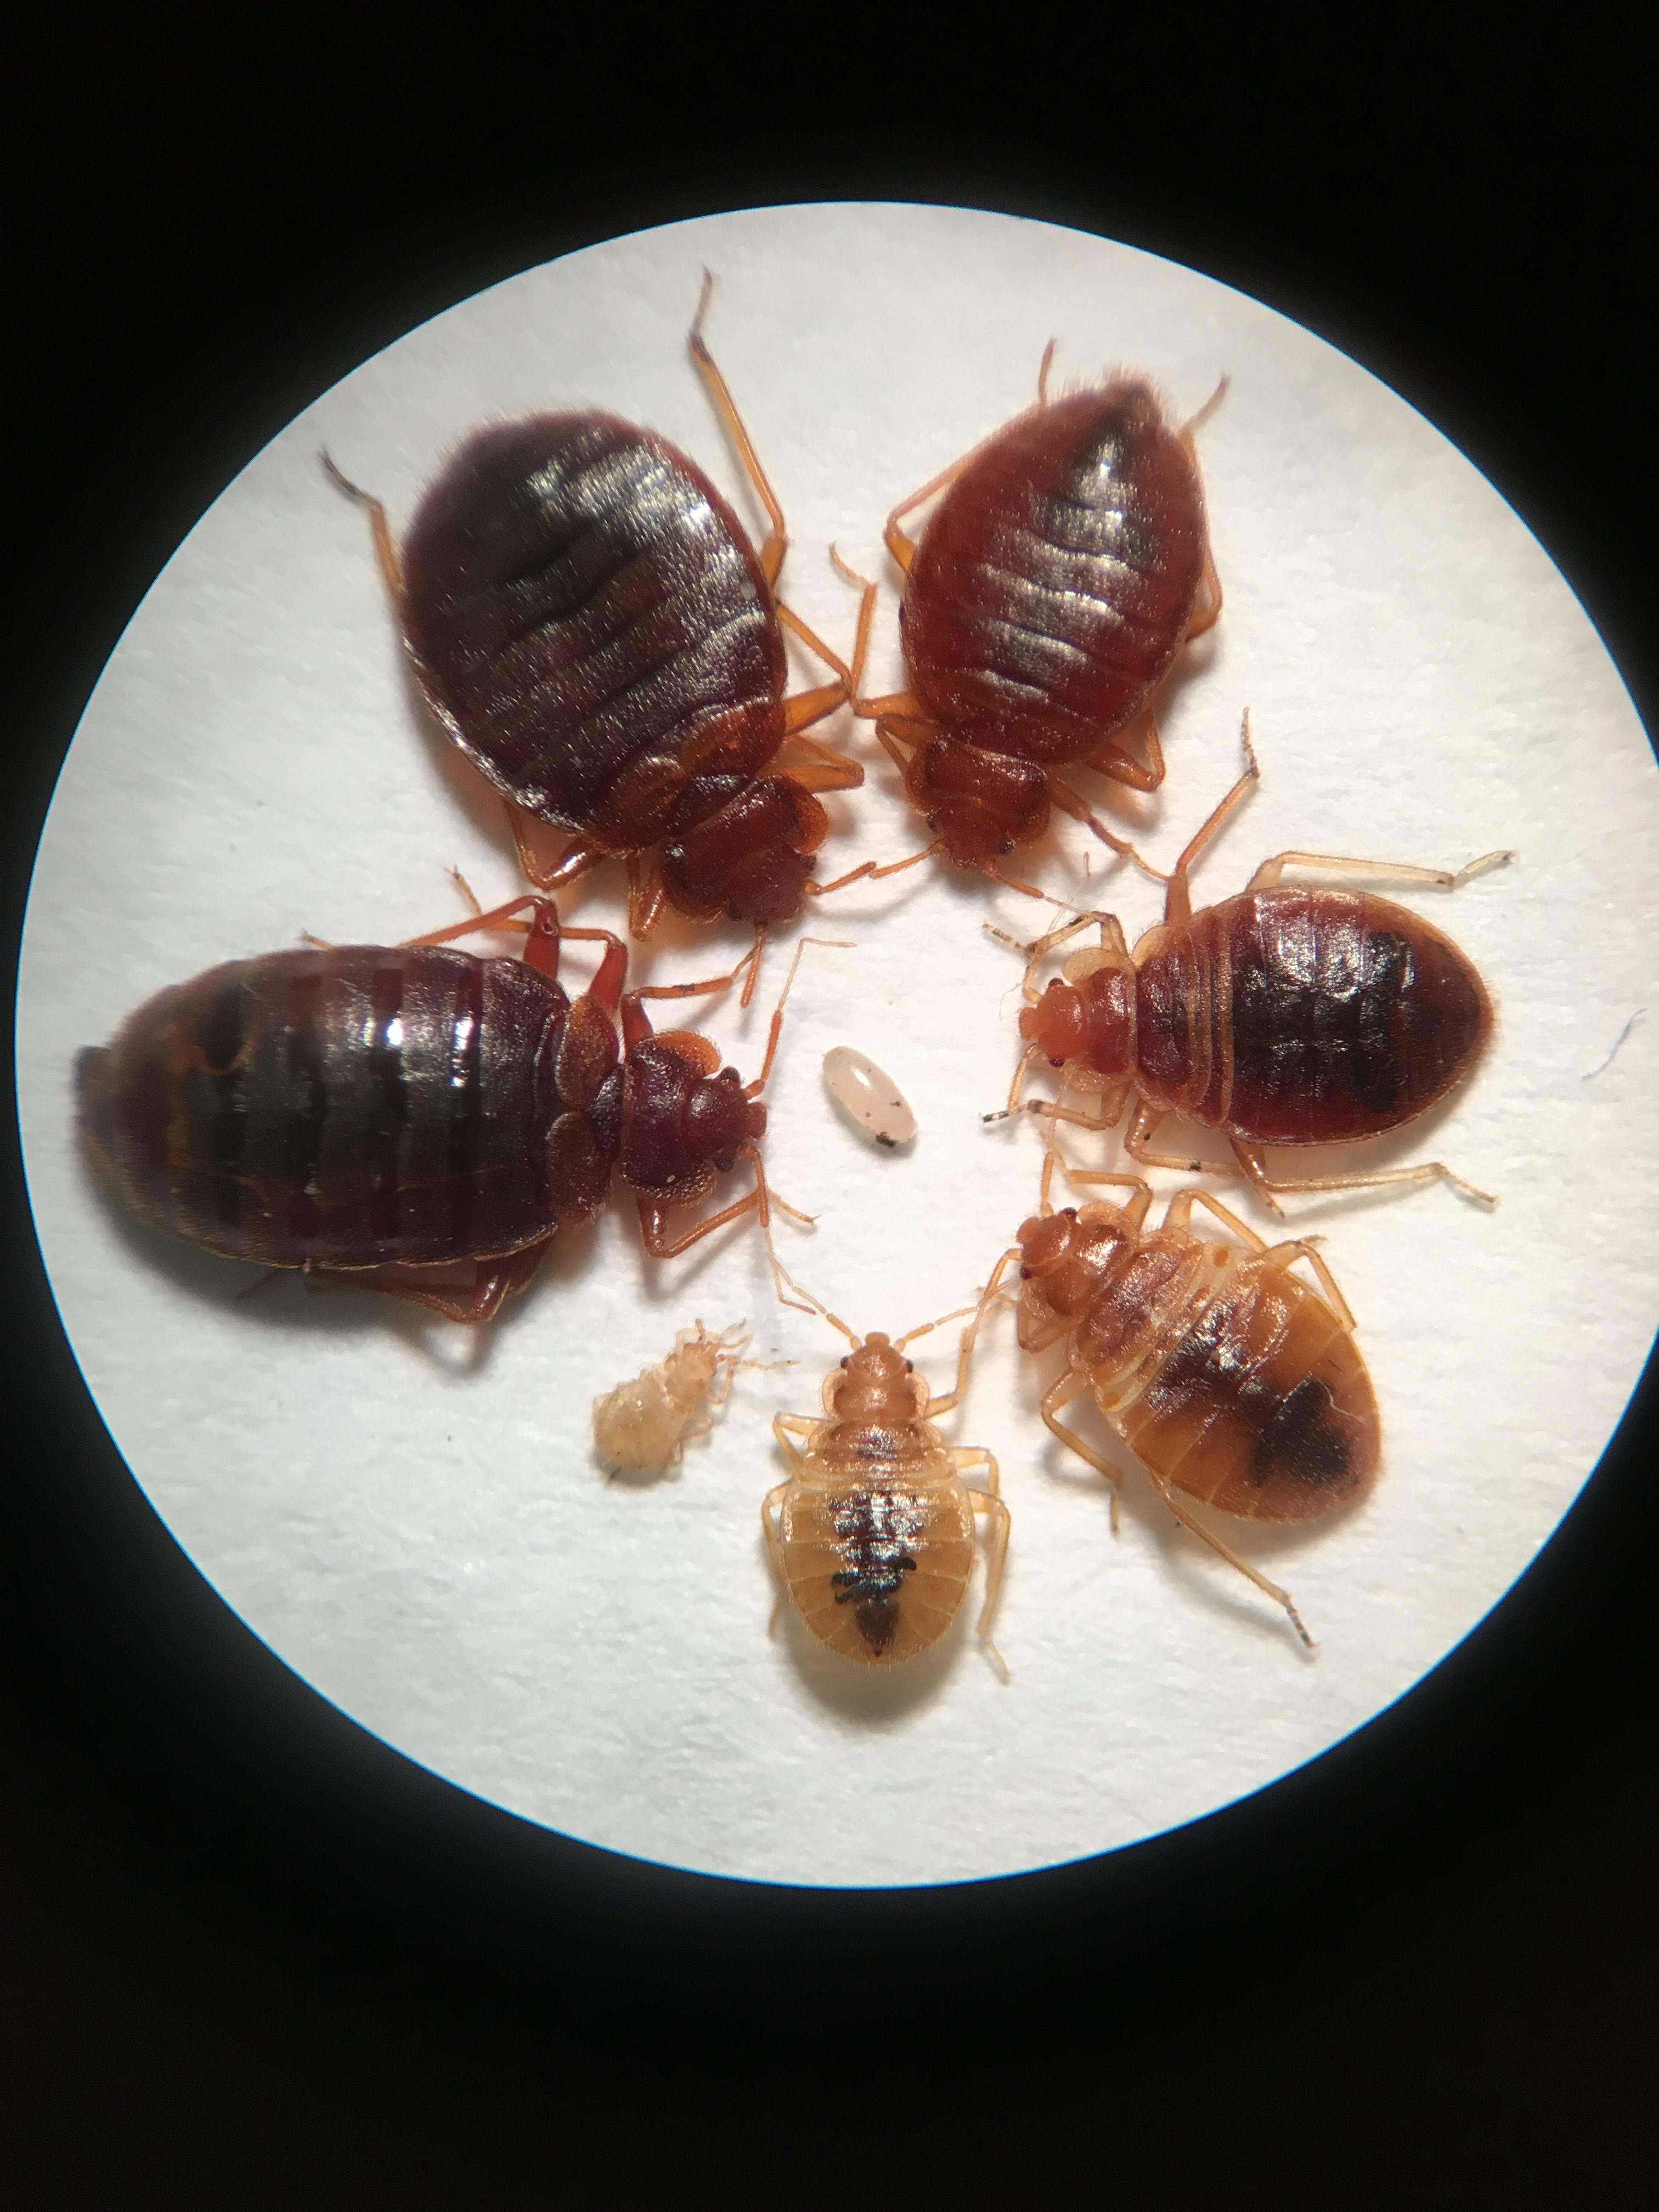 01 Bed Bugs All Instars Then Adult Engorged. Courtesy J. GreenJPG 